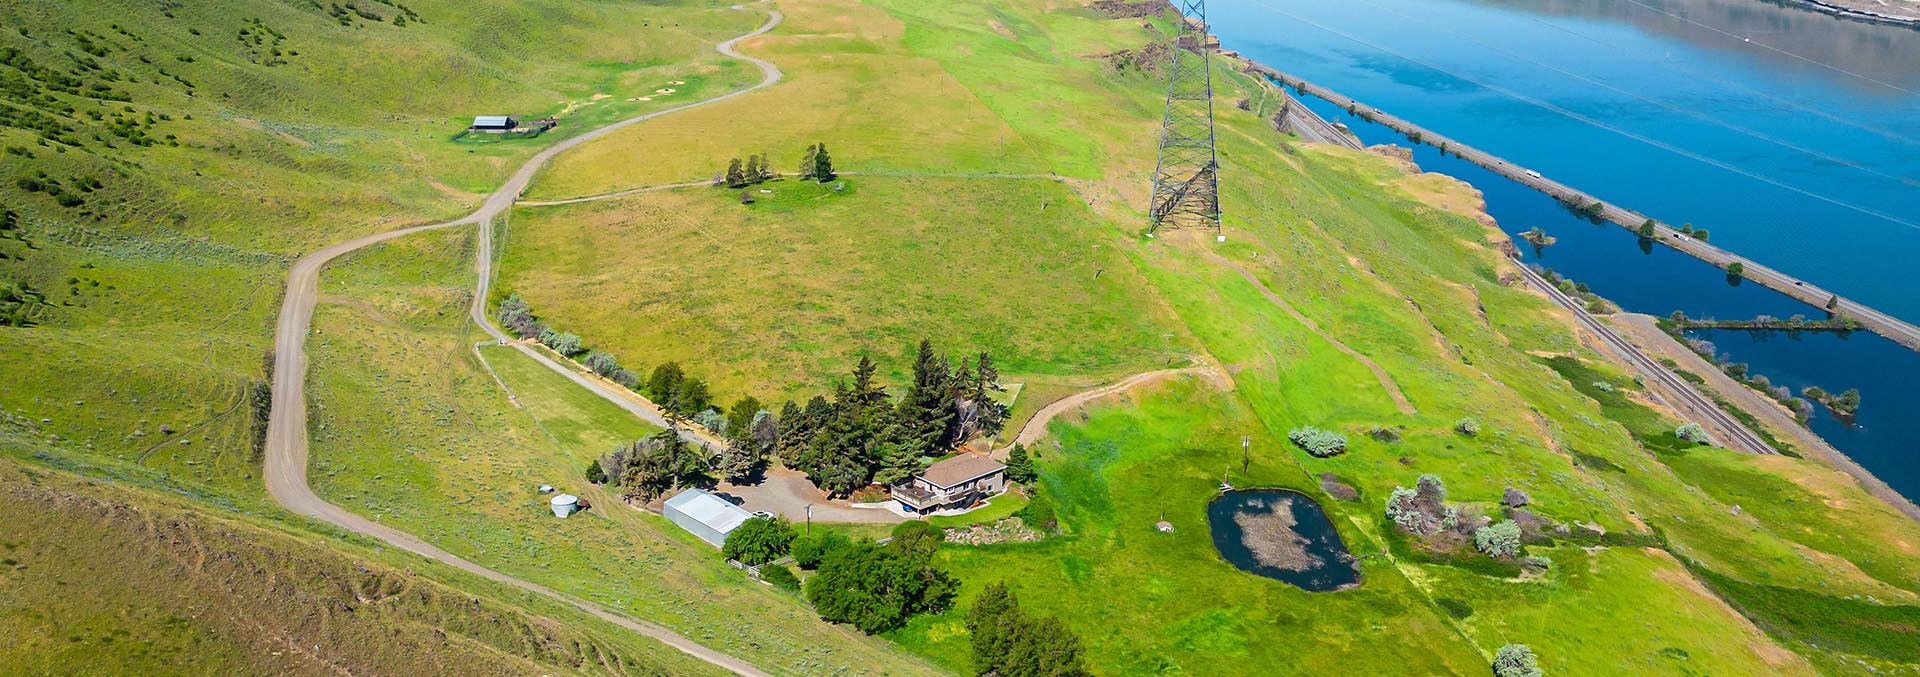 oregon ranches for sale fulton ridge ranch on the columbia